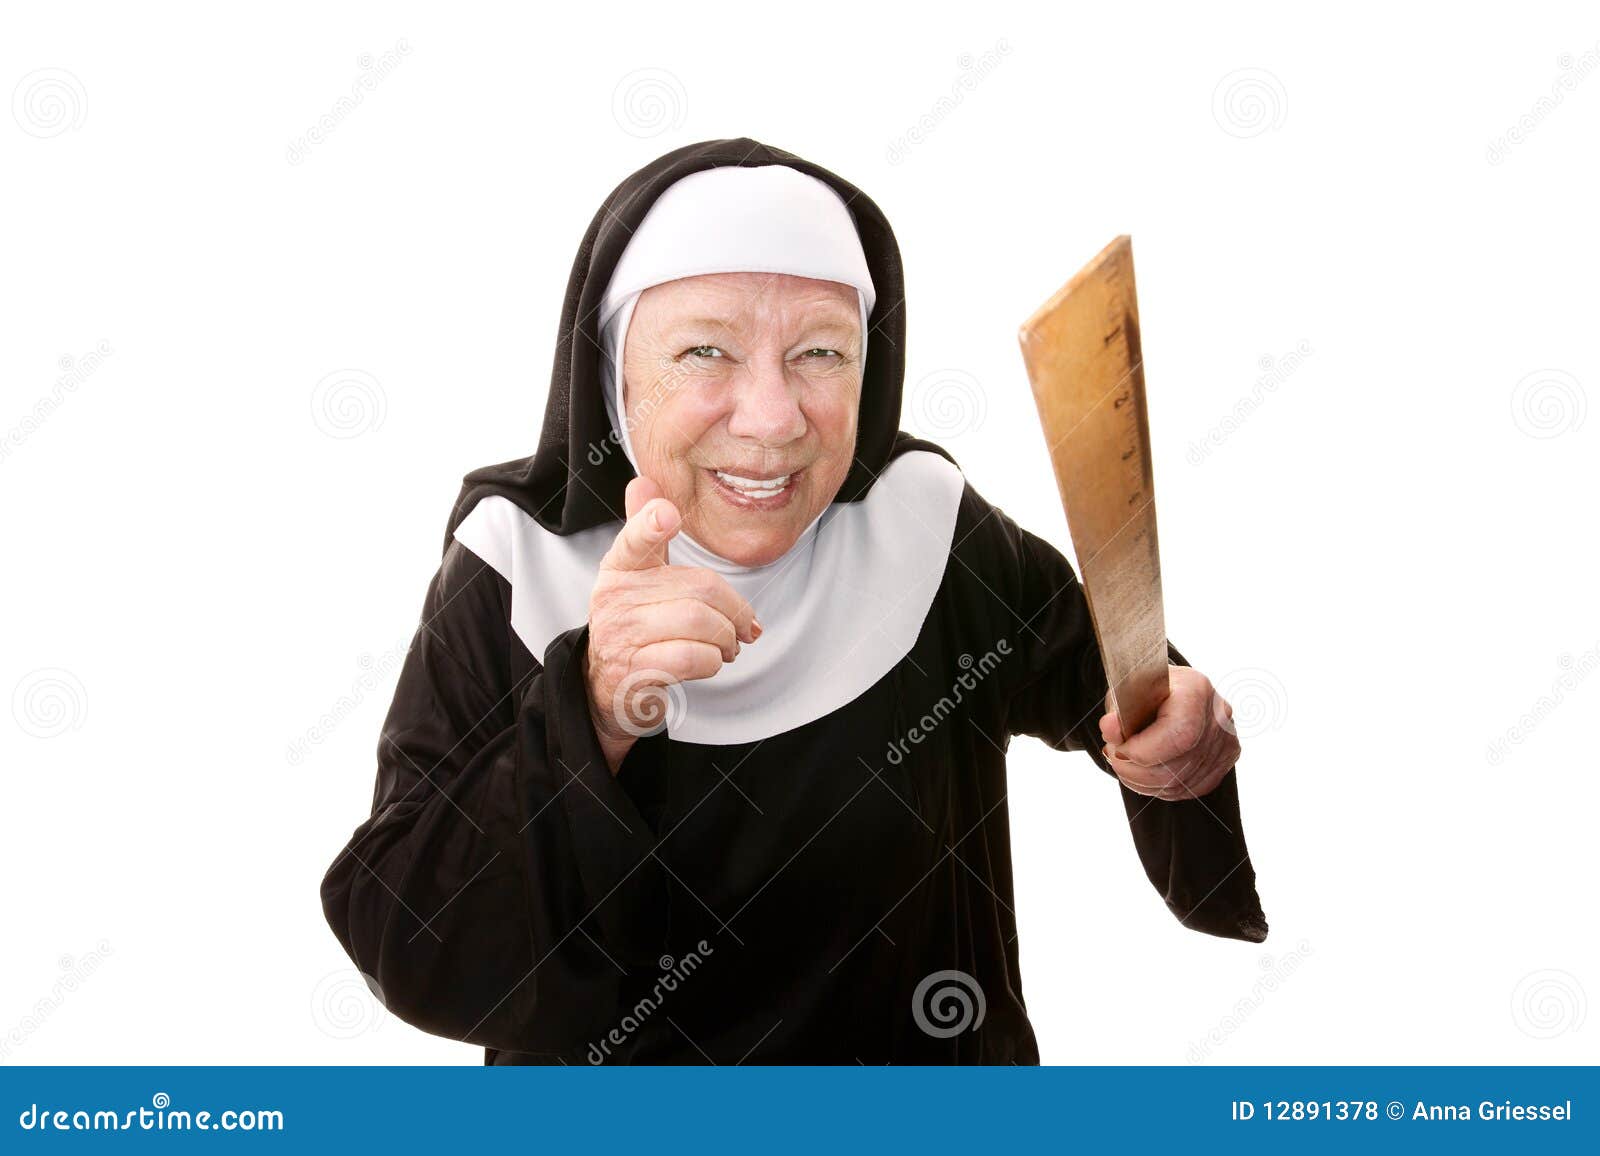 funny nun clipart images - photo #32